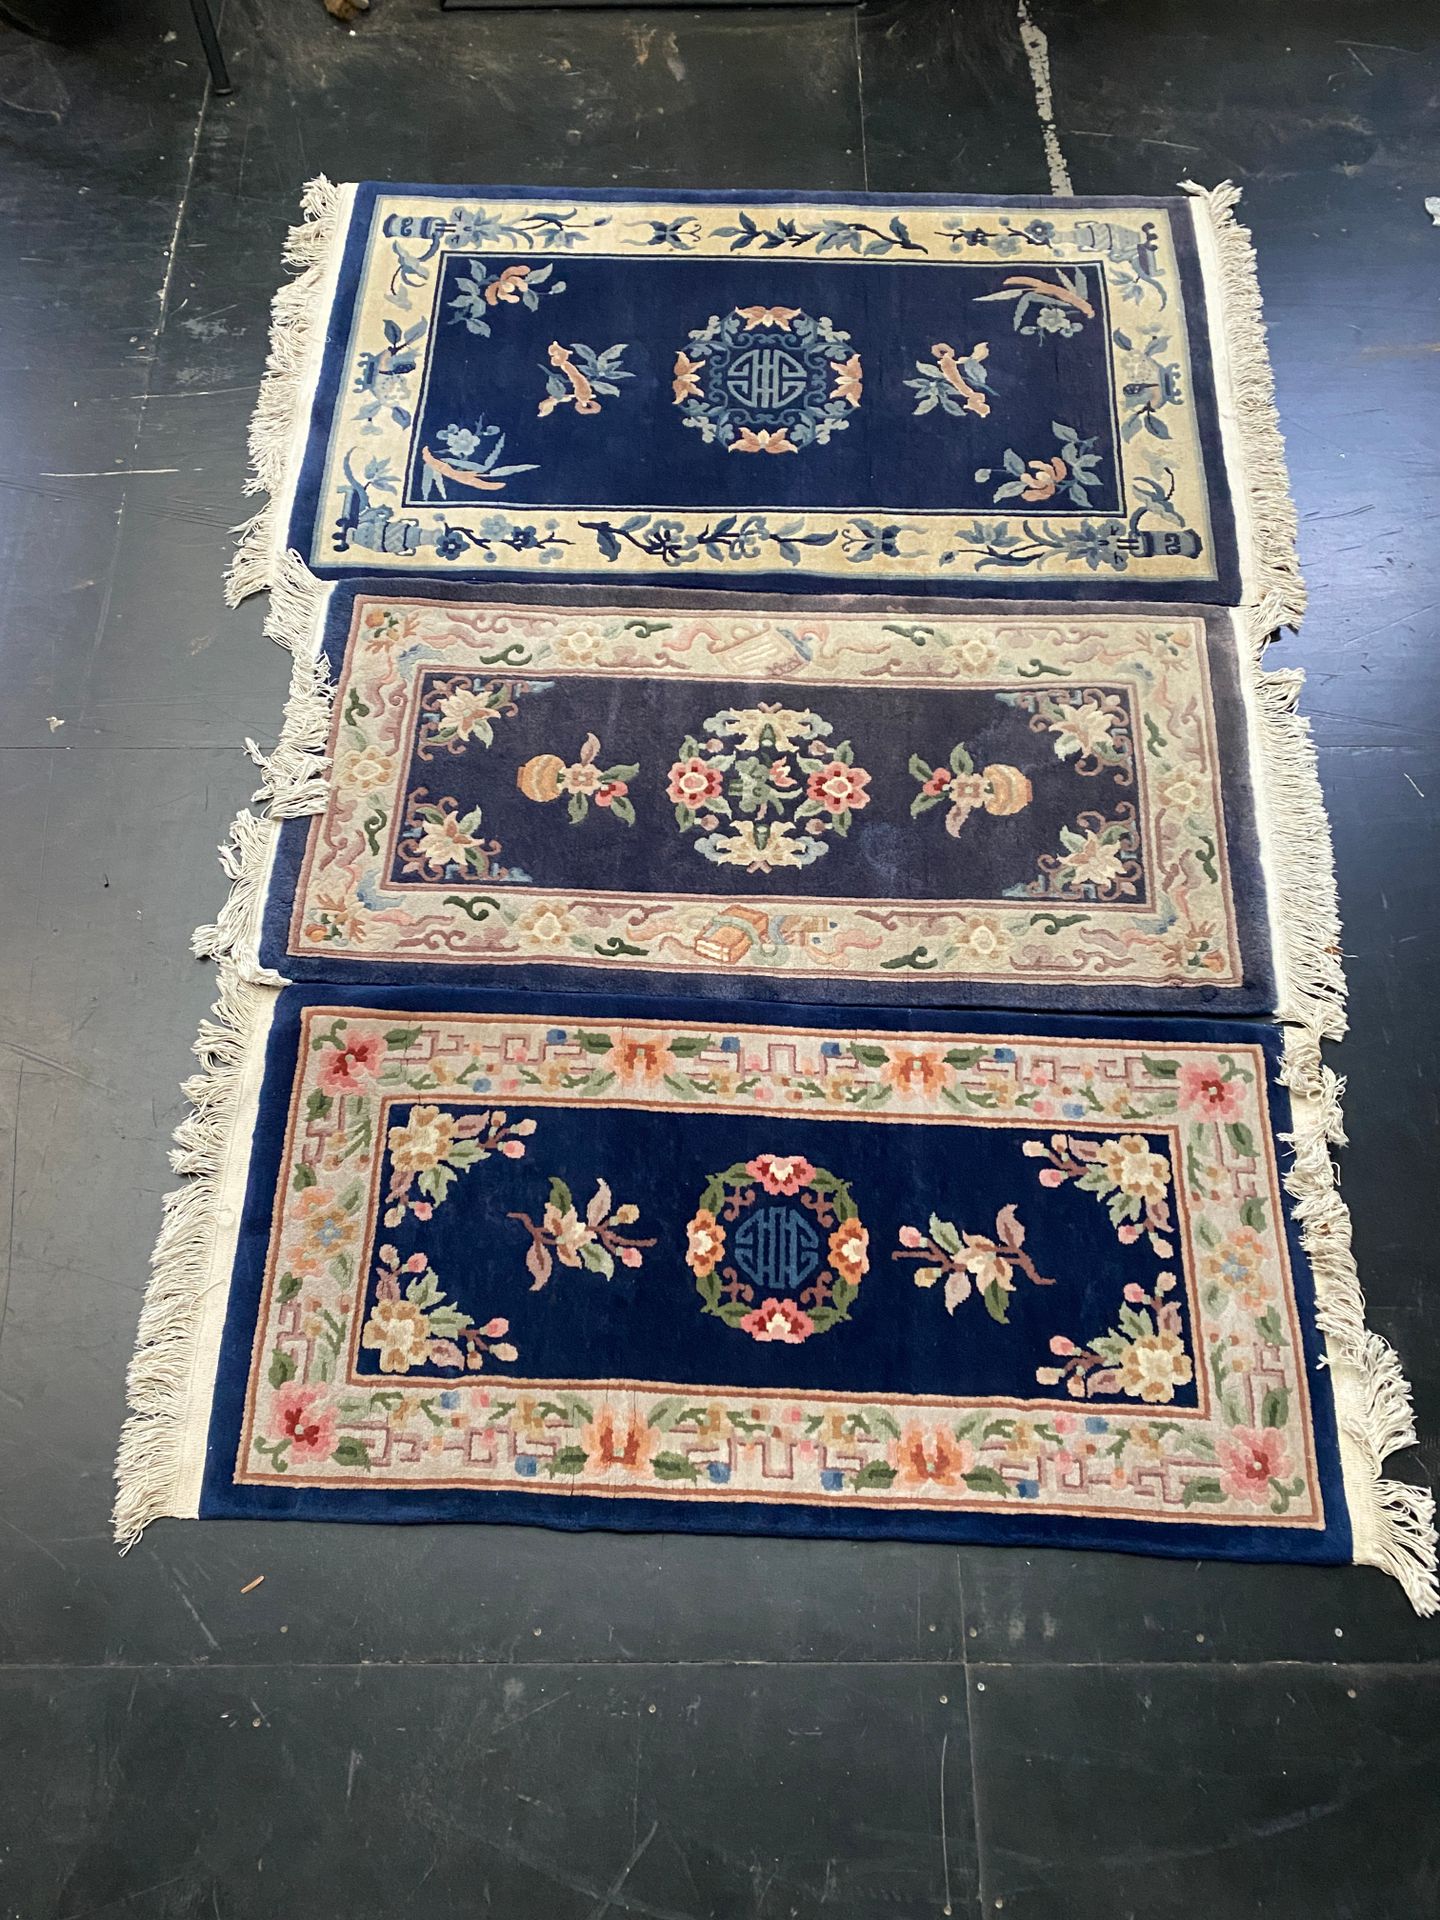 Null Set of three Chinese rugs with blue background

160 x 94 cm (the largest)